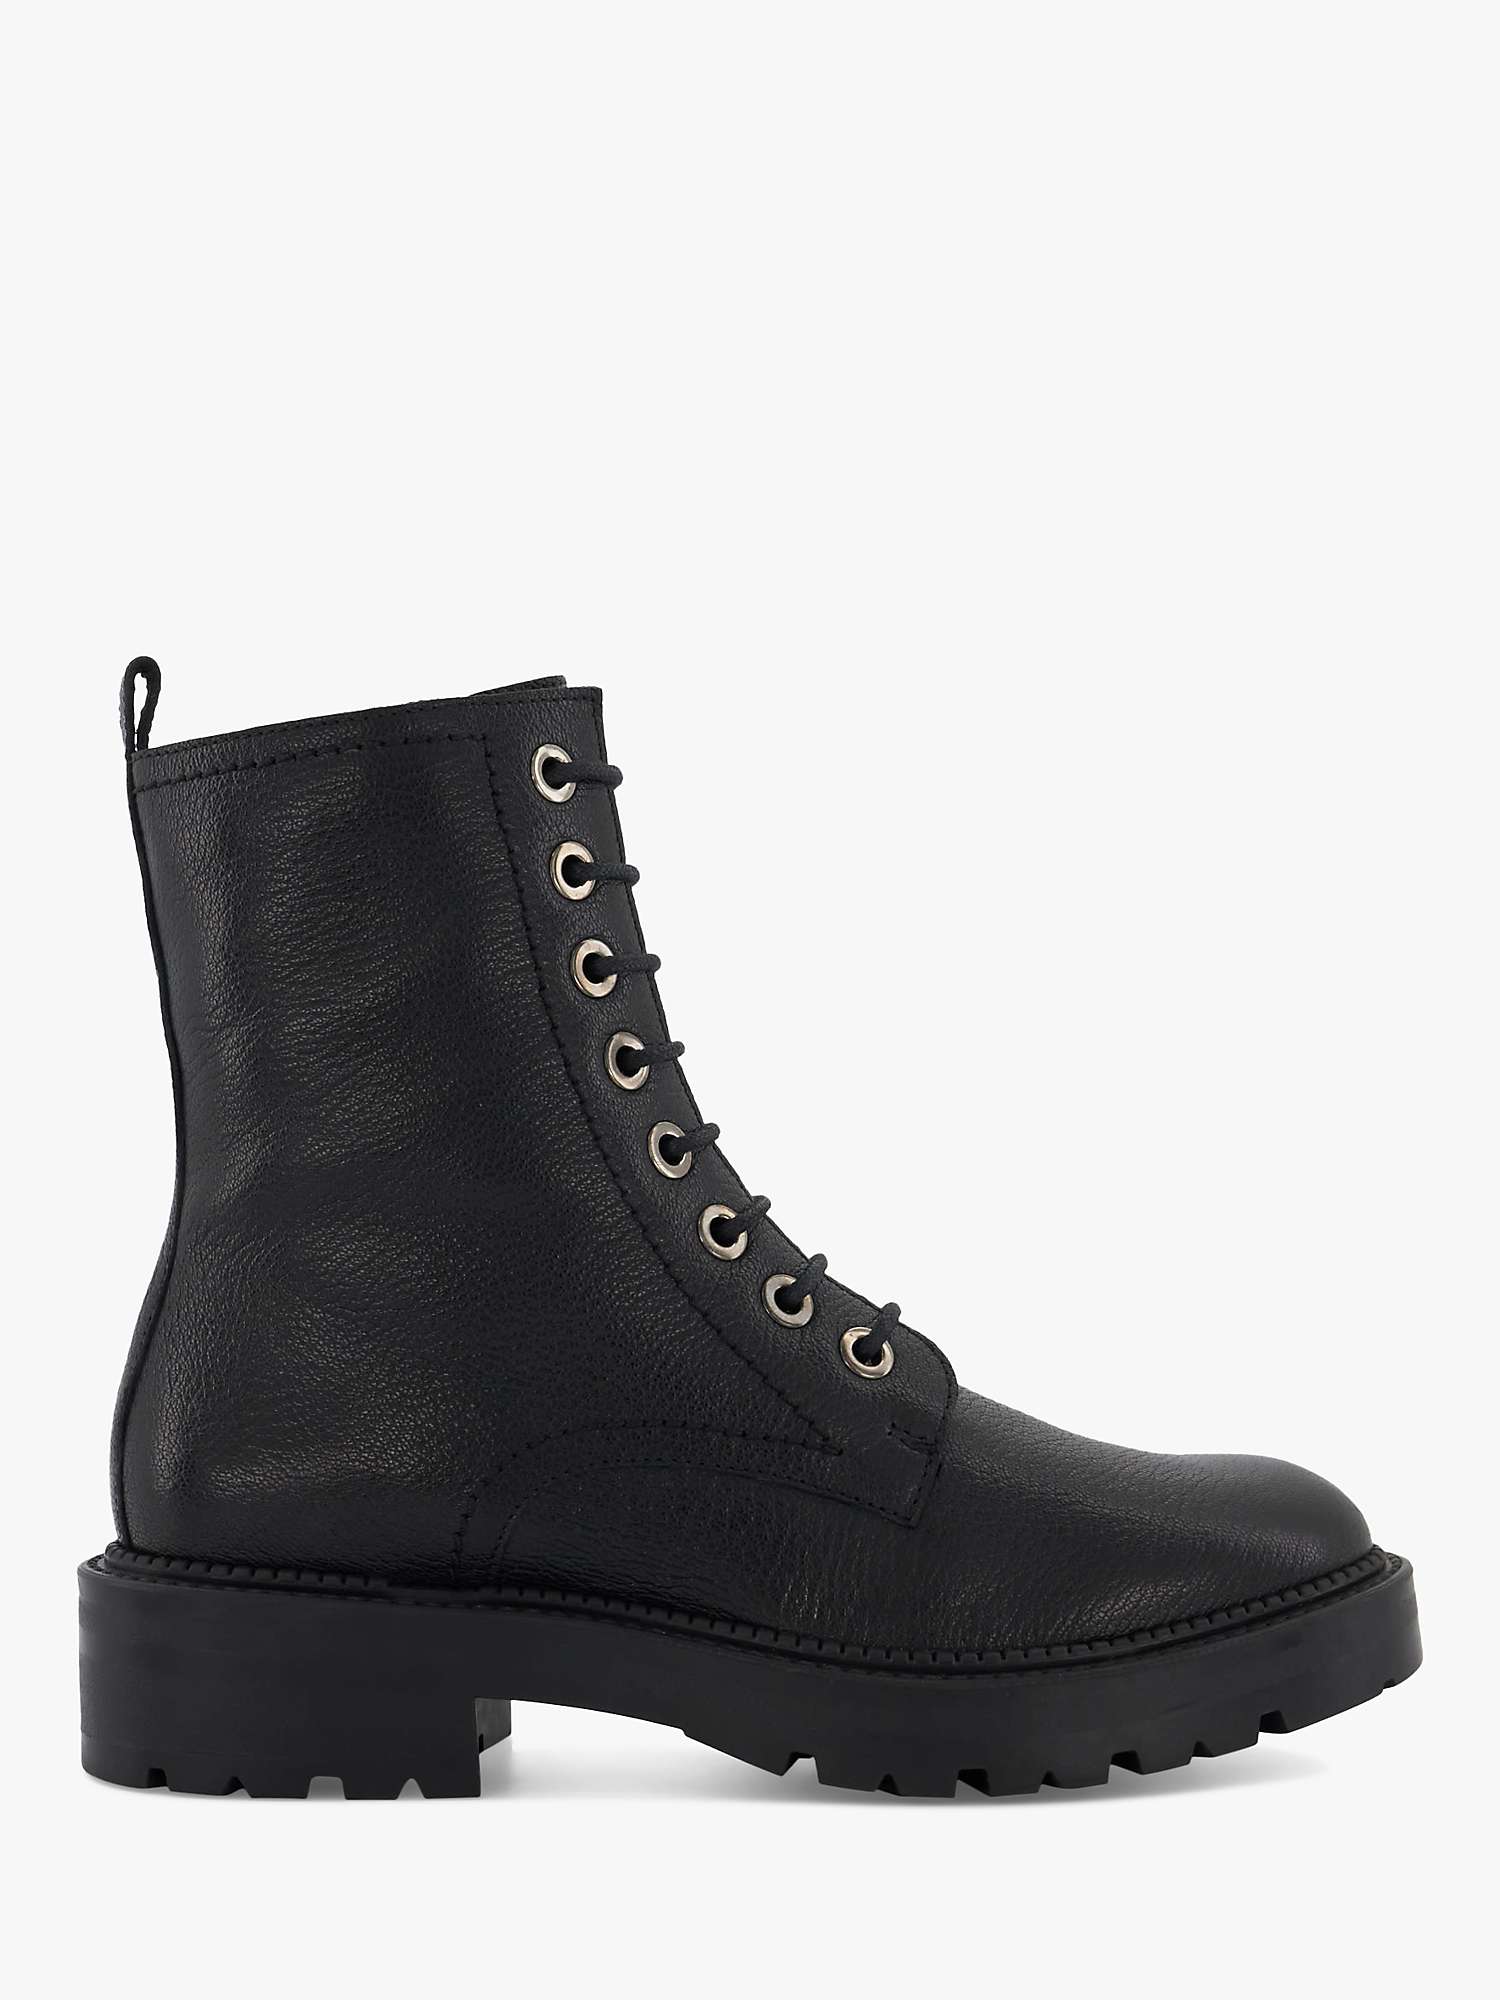 Buy Dune Press Embossed Leather Ankle Boots, Black Online at johnlewis.com